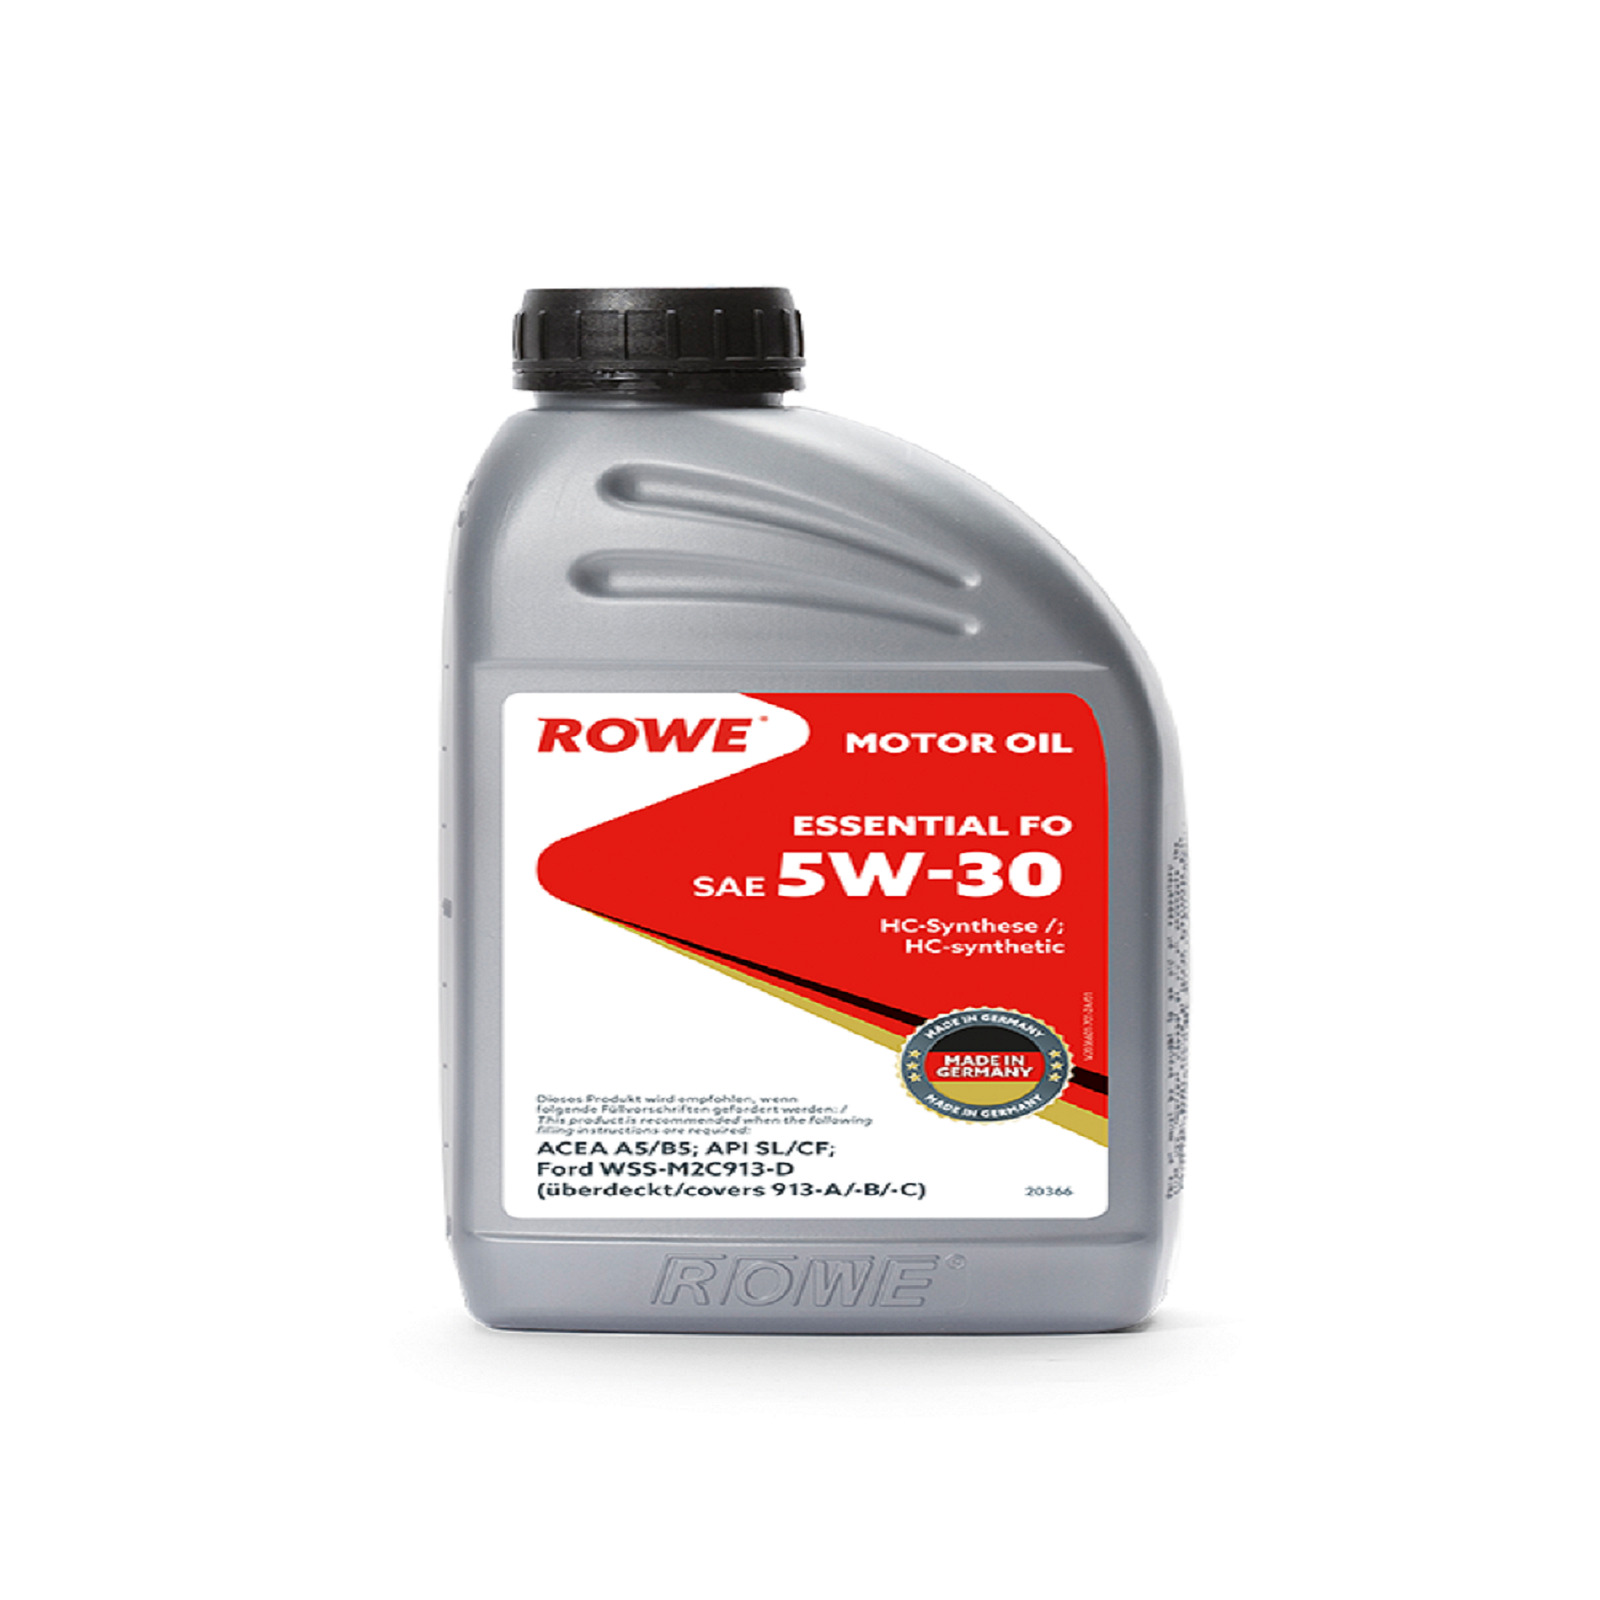 Моторное масло rowe 5w 30. Rowe Essential SAE 5w-30 Fo. Рове масло 5w30. Масло Rowe Essential 5w30. Rowe 5w30 Fo 5 л.